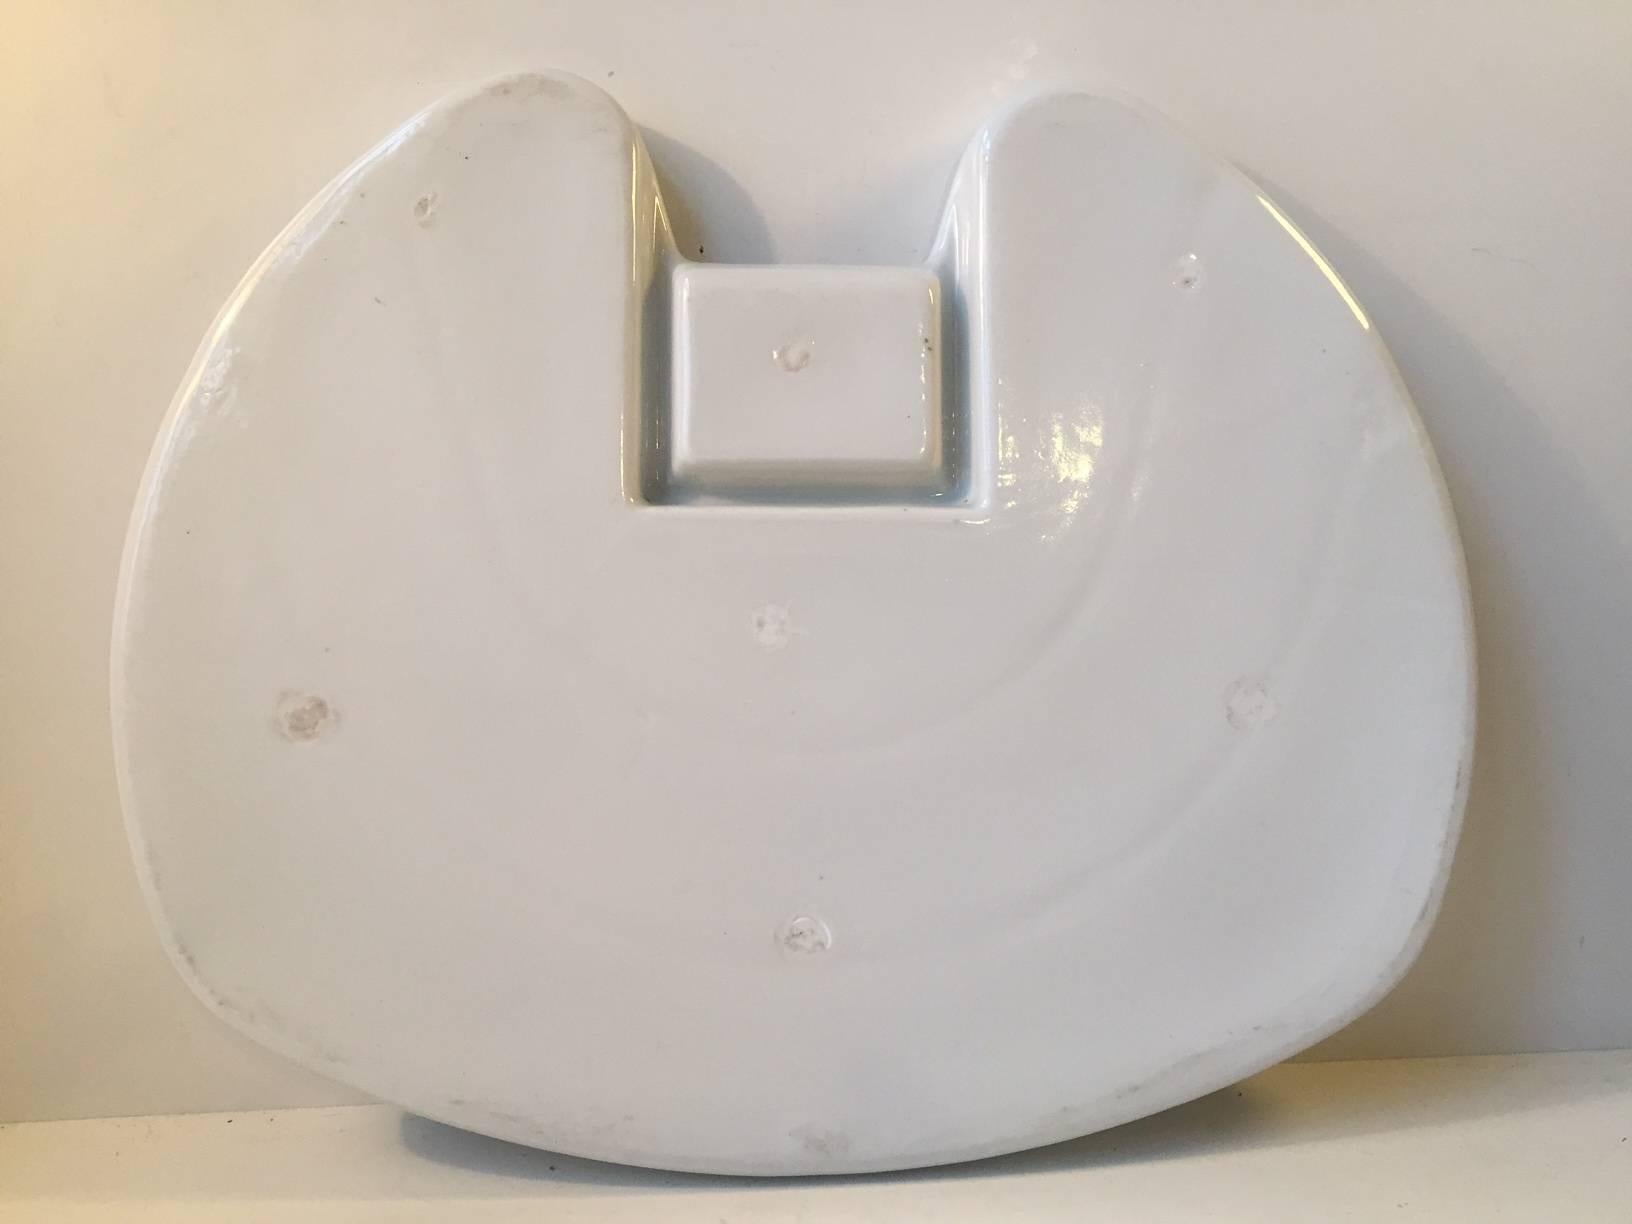 Glazed Large Tooth Shaped Porcelain Tray for Dental Instruments, Bauhaus, Germany 1930s